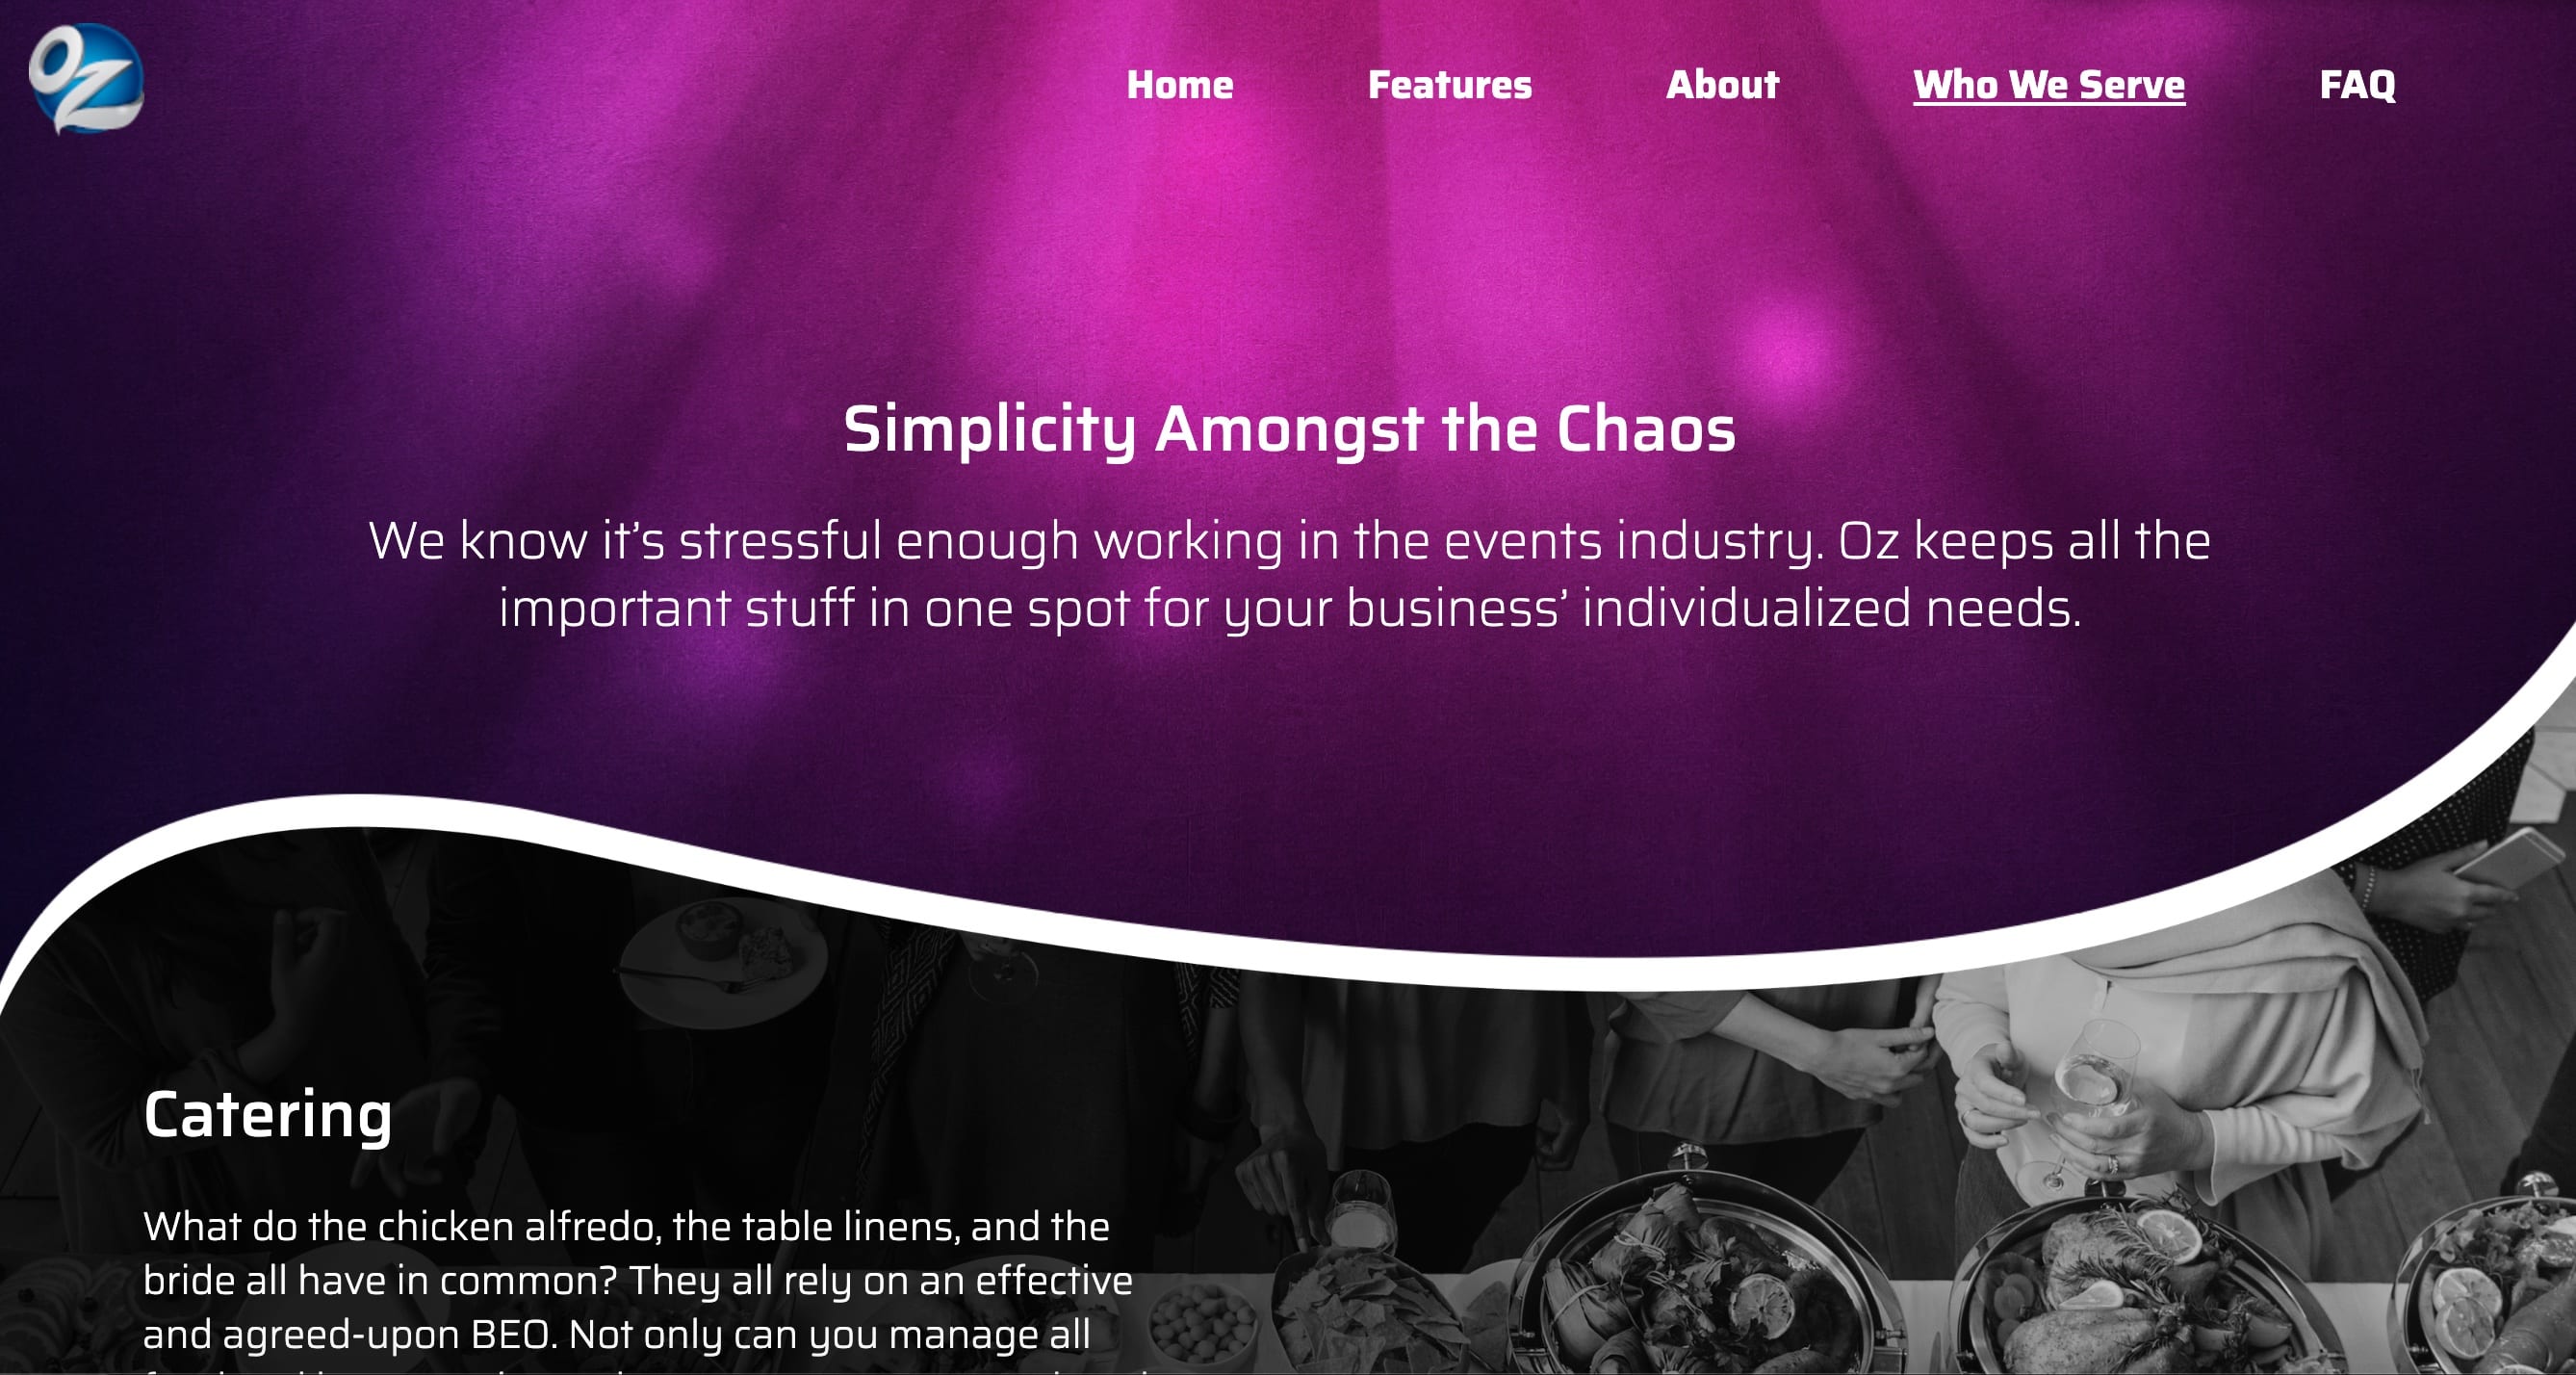 Screenshot of site homepage. There is a purple wave image across the top.